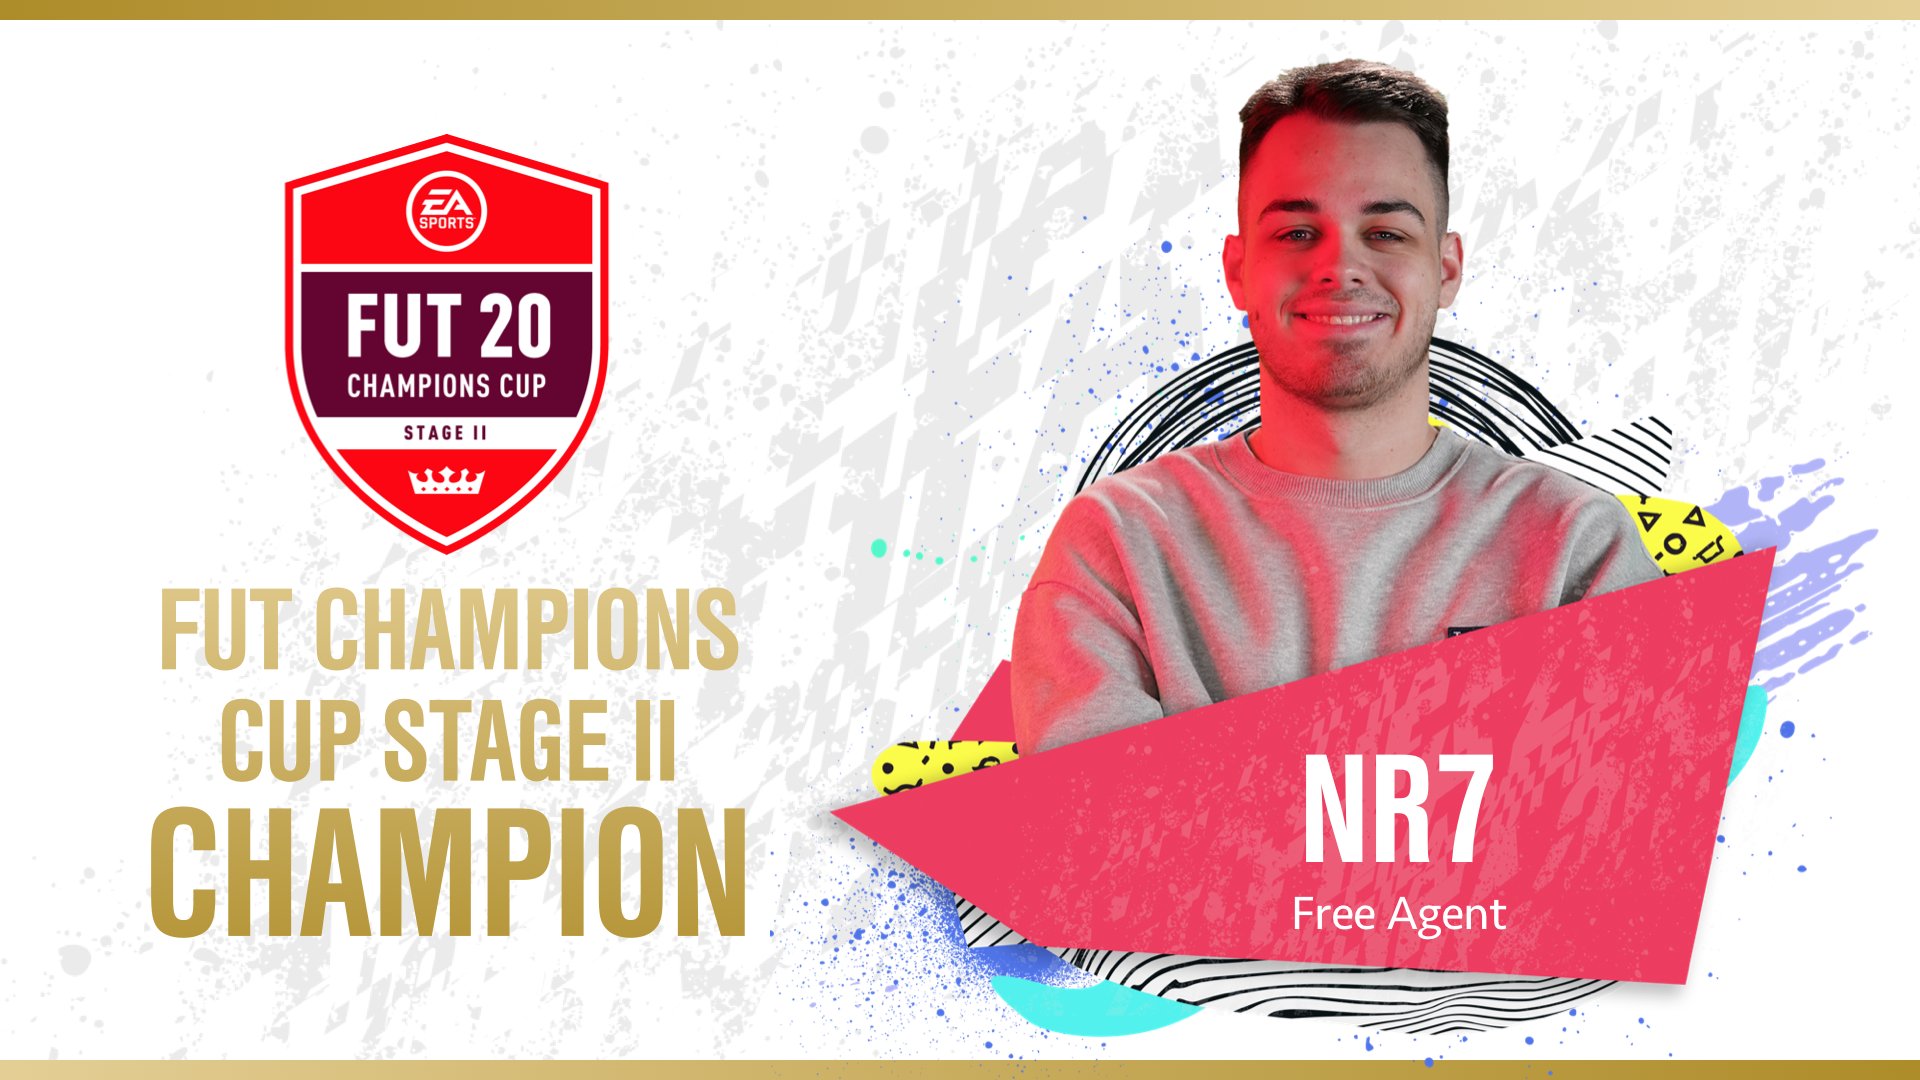 Nraseck win FUT Champions Cup Stage 2